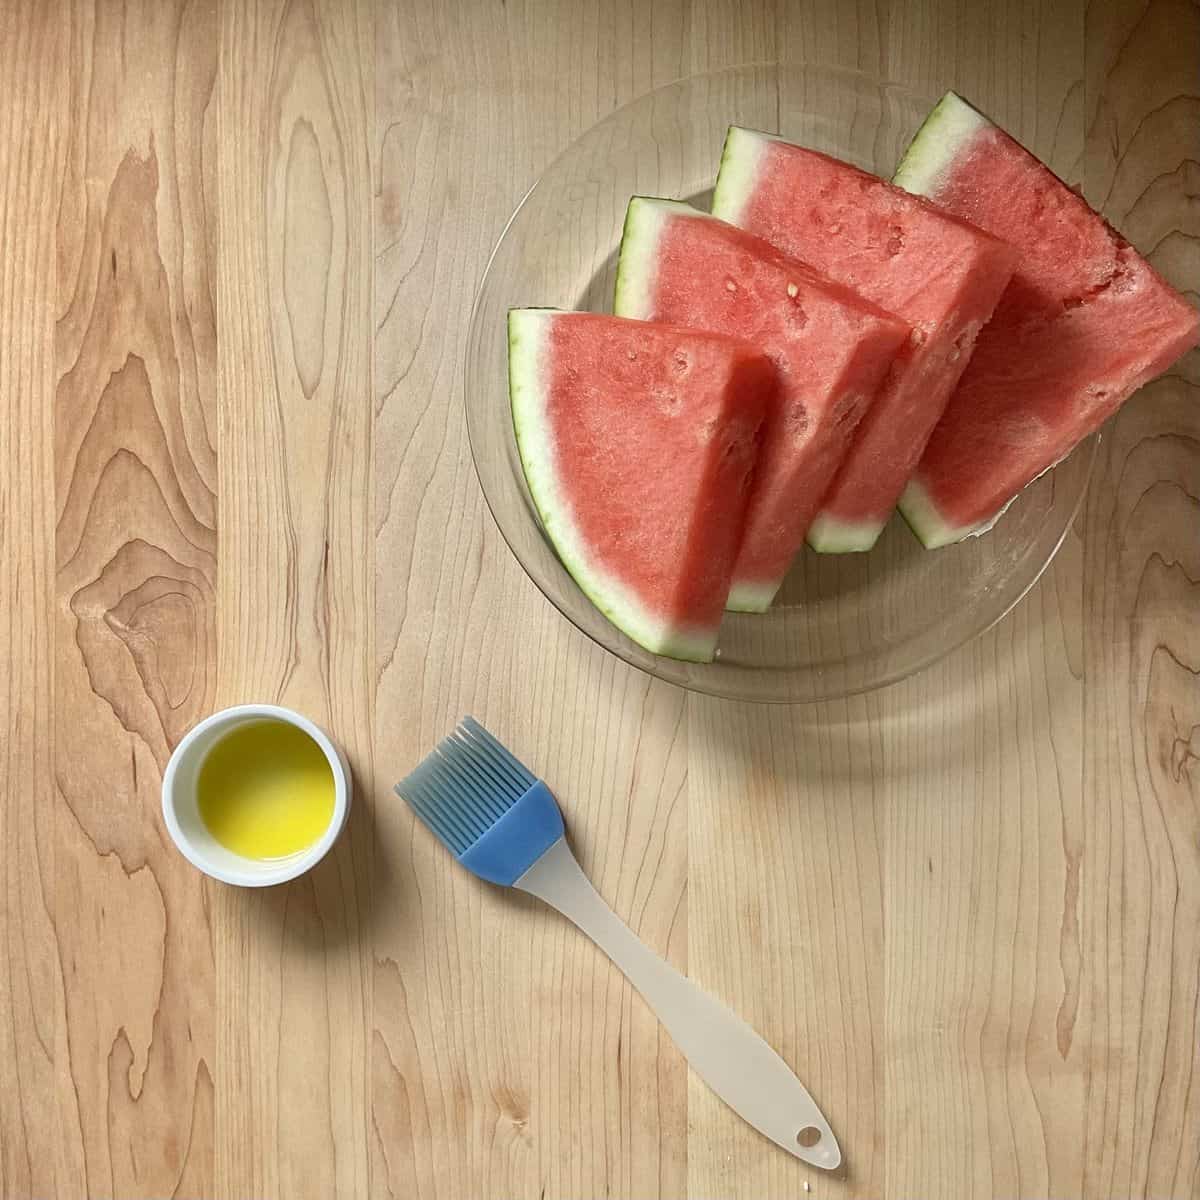 Watermelon wedges next to a small bowl of olive oil.